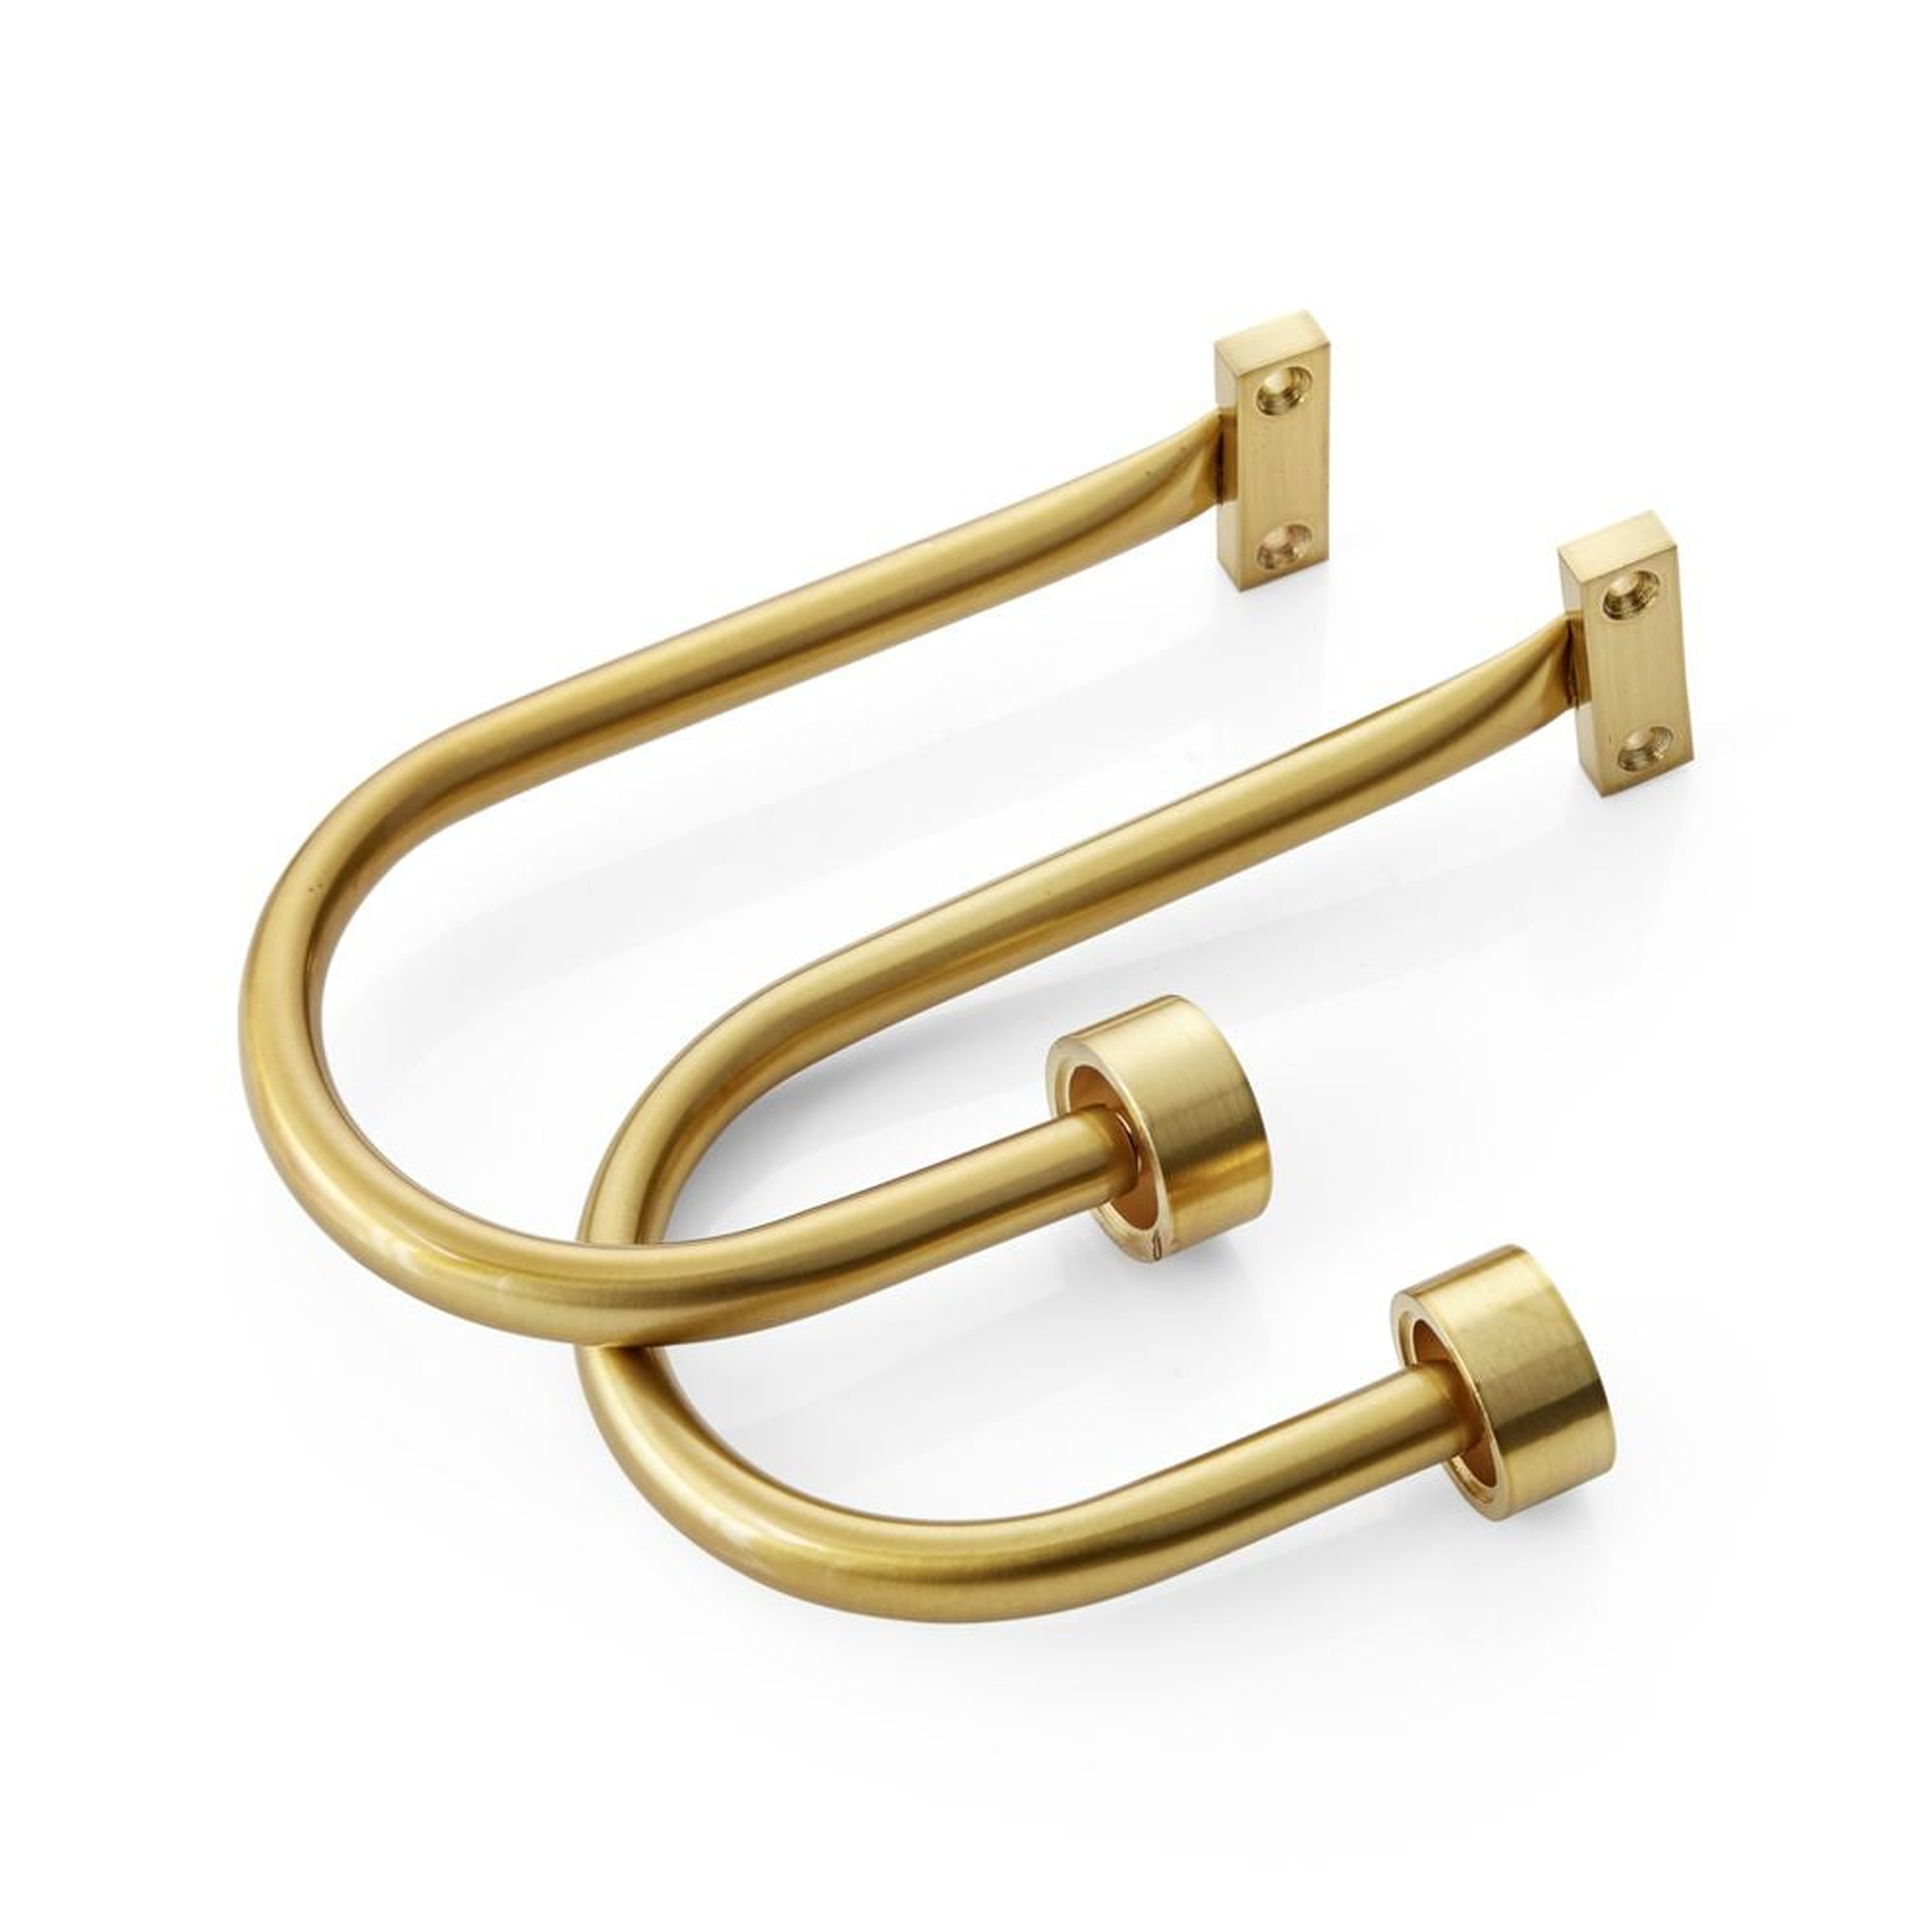 Brass Curtain Tiebacks, Set of 2 - Crate and Barrel